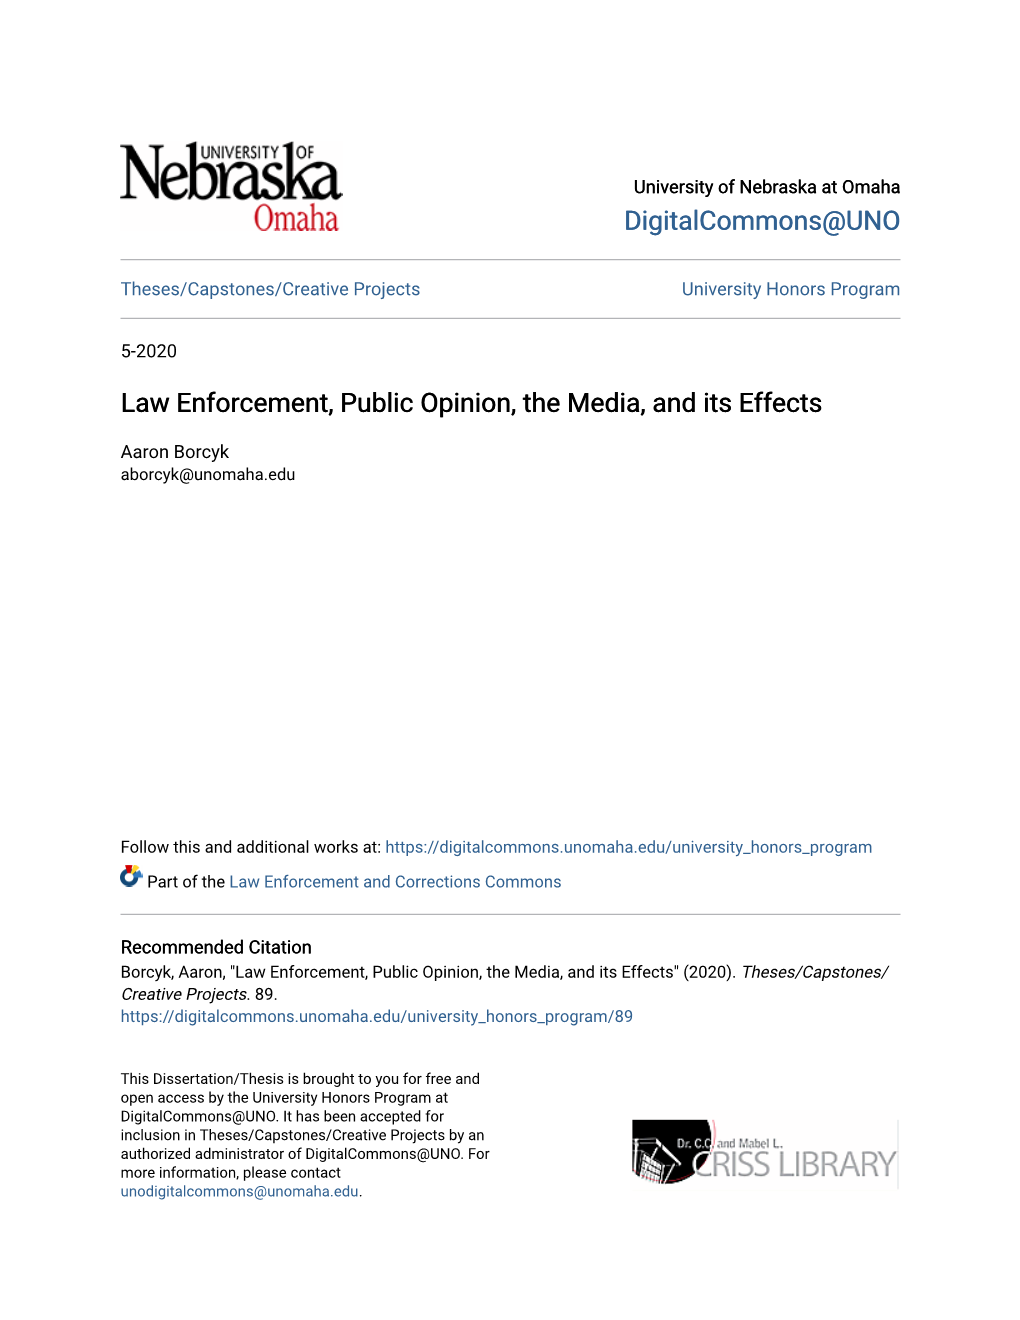 Law Enforcement, Public Opinion, the Media, and Its Effects